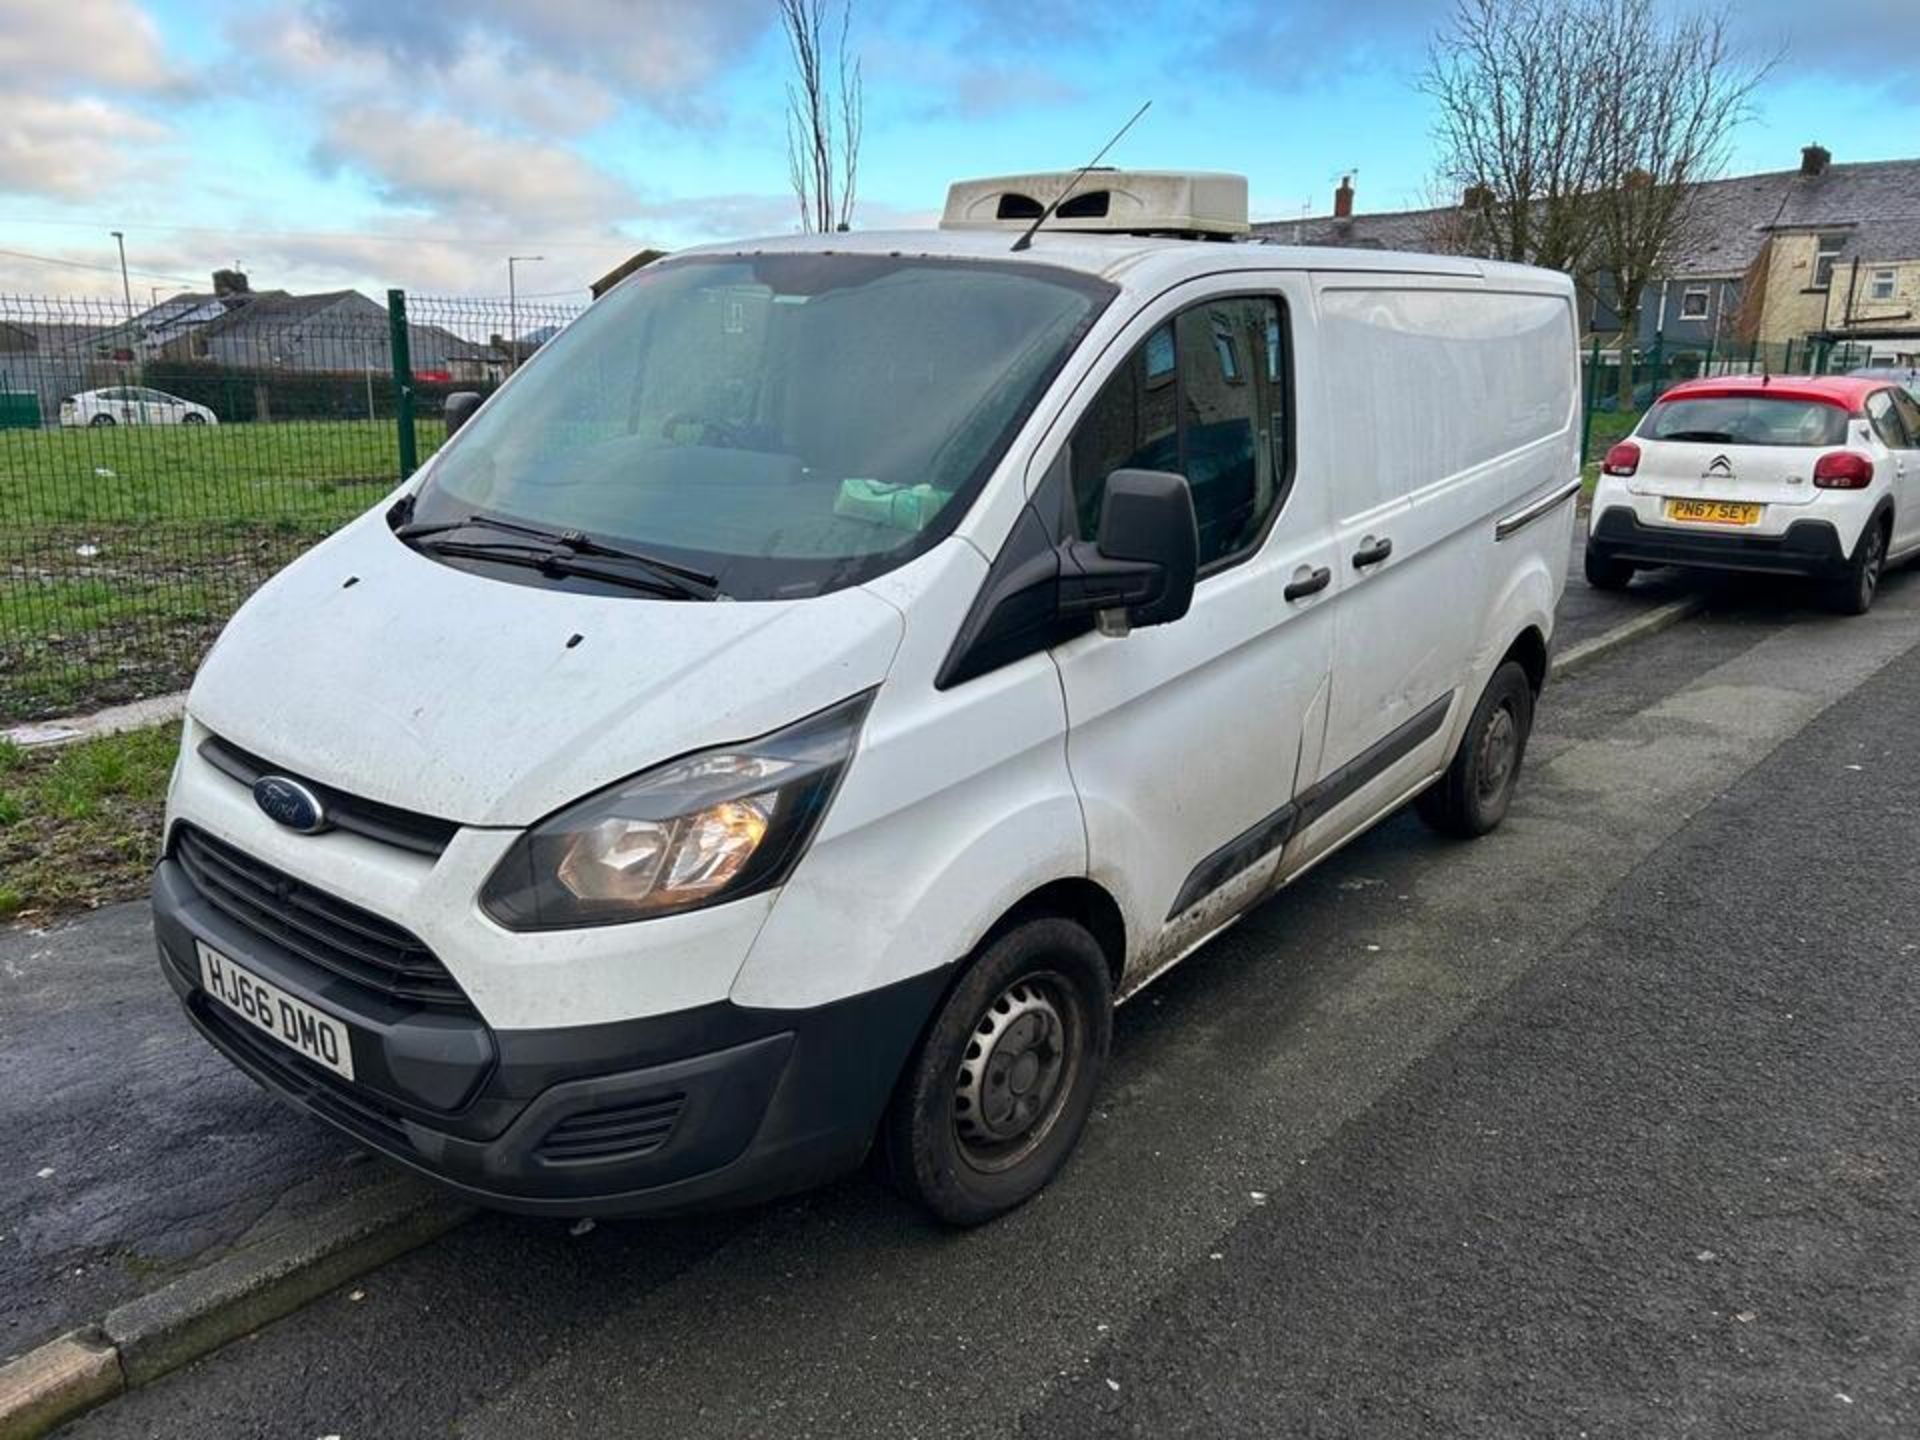 2016 FORD TRANSIT - 309K MILES - HPI CLEAR - READY TO GO! - Image 2 of 12